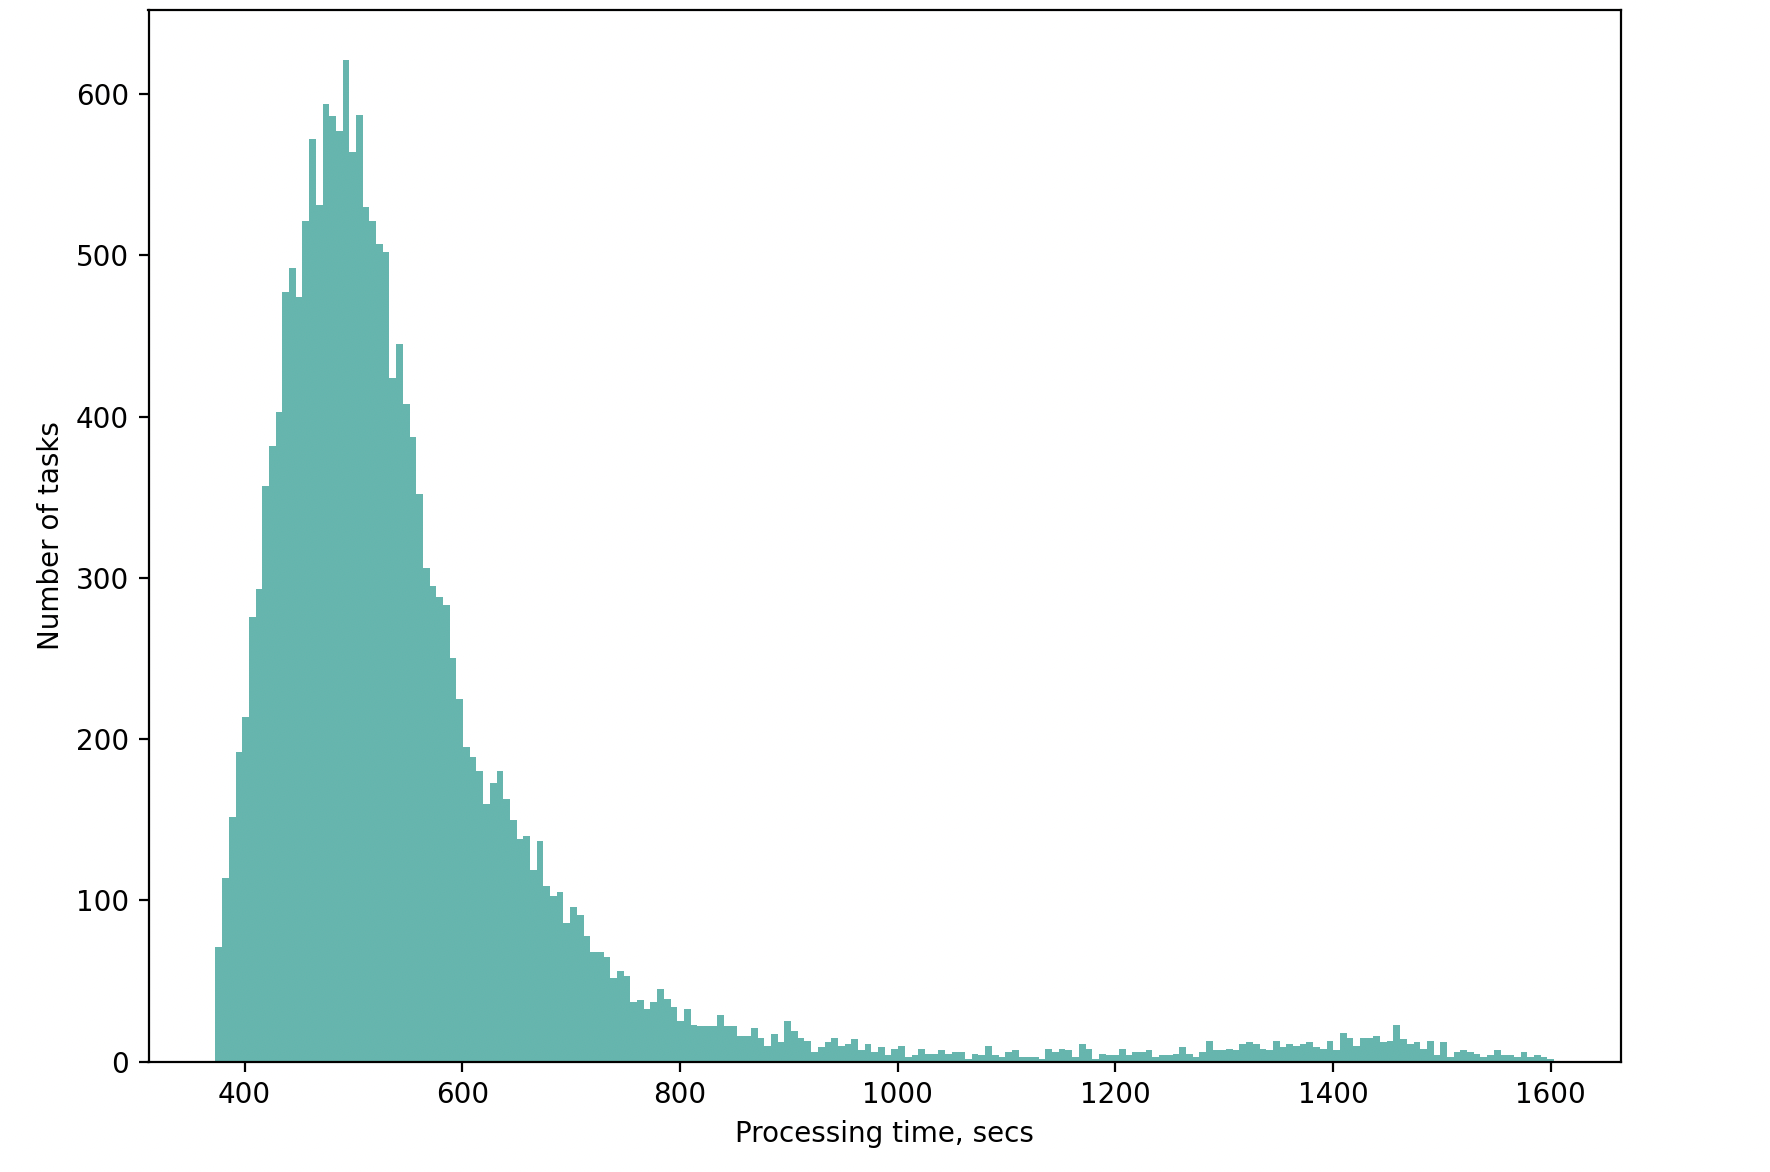 Bar chart of task processing time distribution showing a peak at 500 seconds